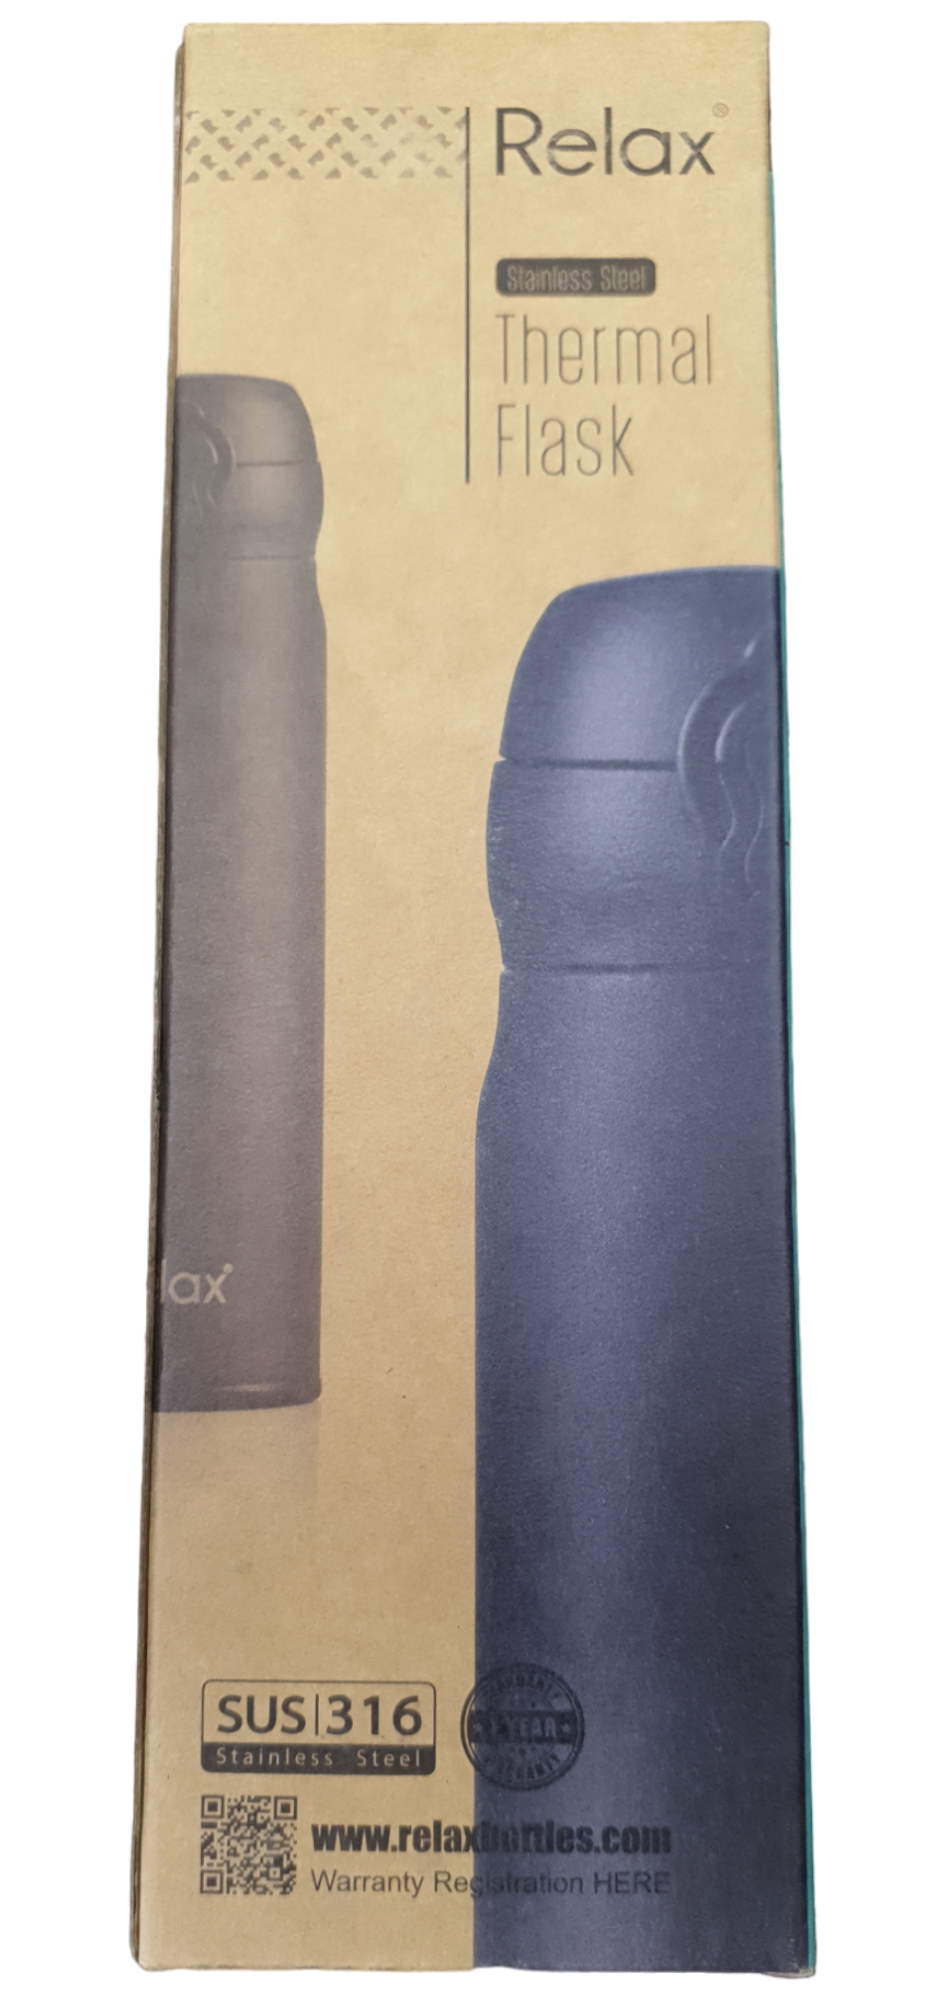 Relax Stainless Steel Thermal Flask Black 500ml